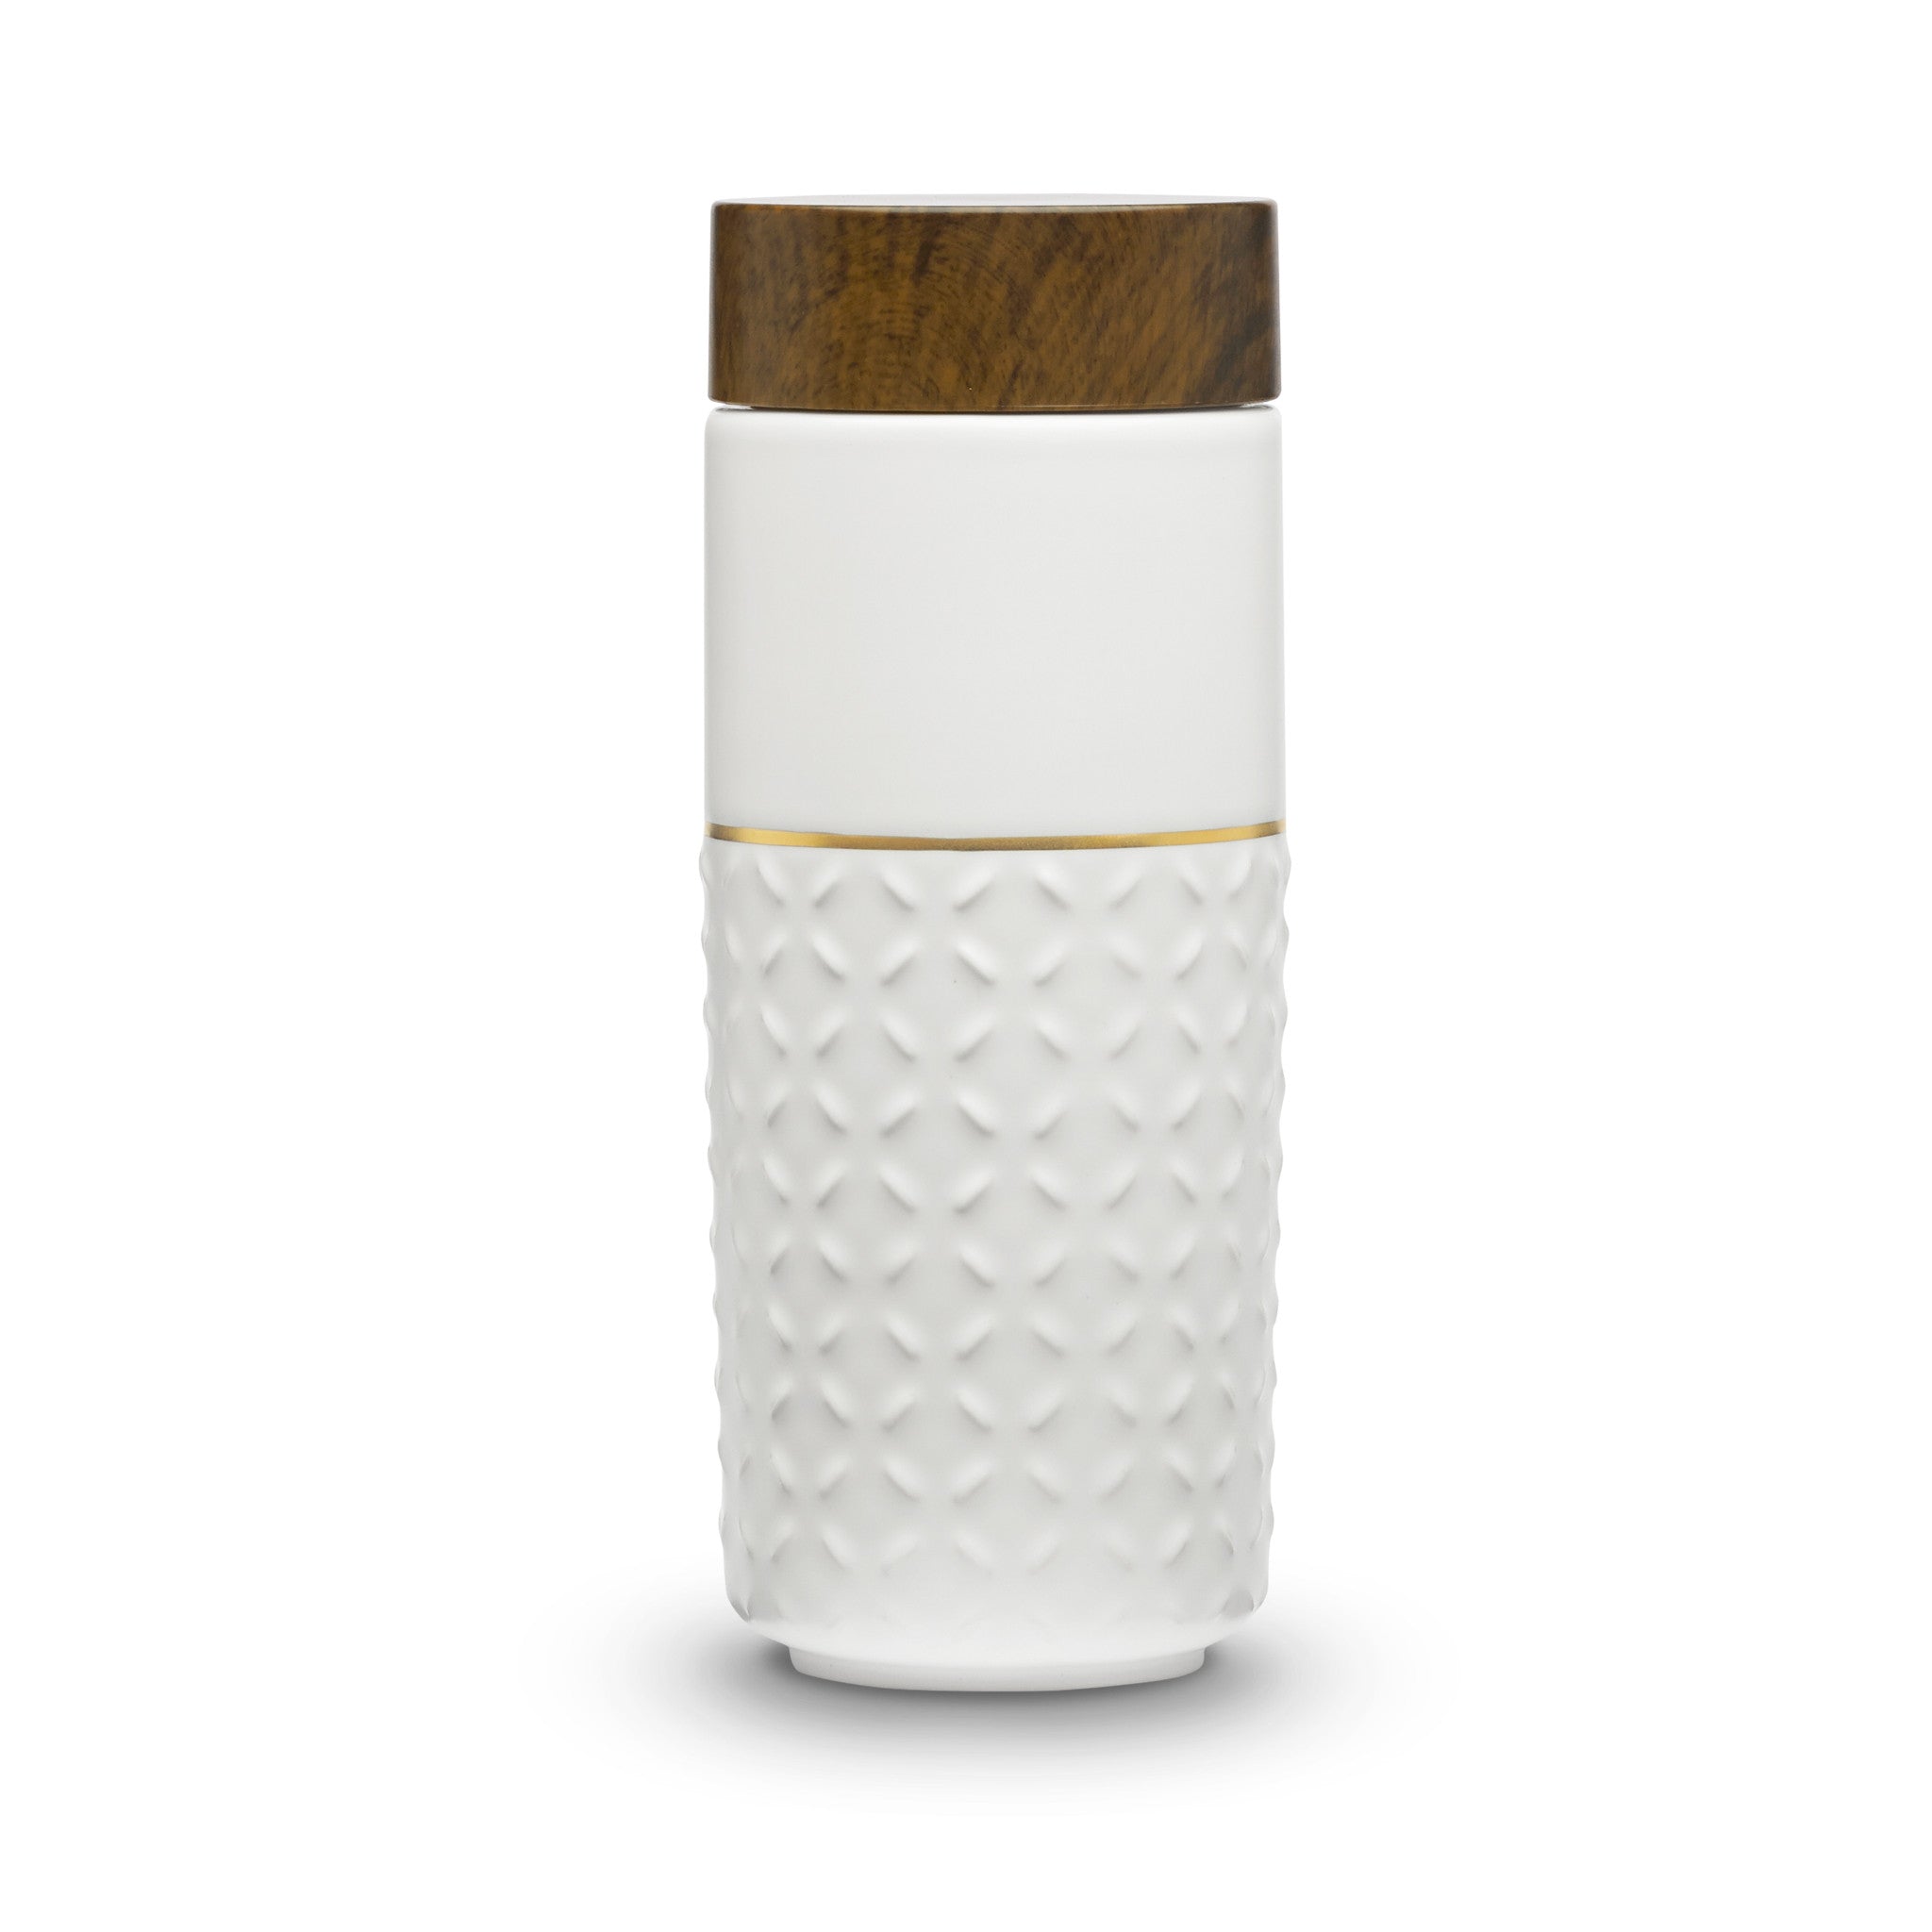 One-O-One / Dreamy Starry Sky Gold Ceramic Tumbler by ACERA LIVEN